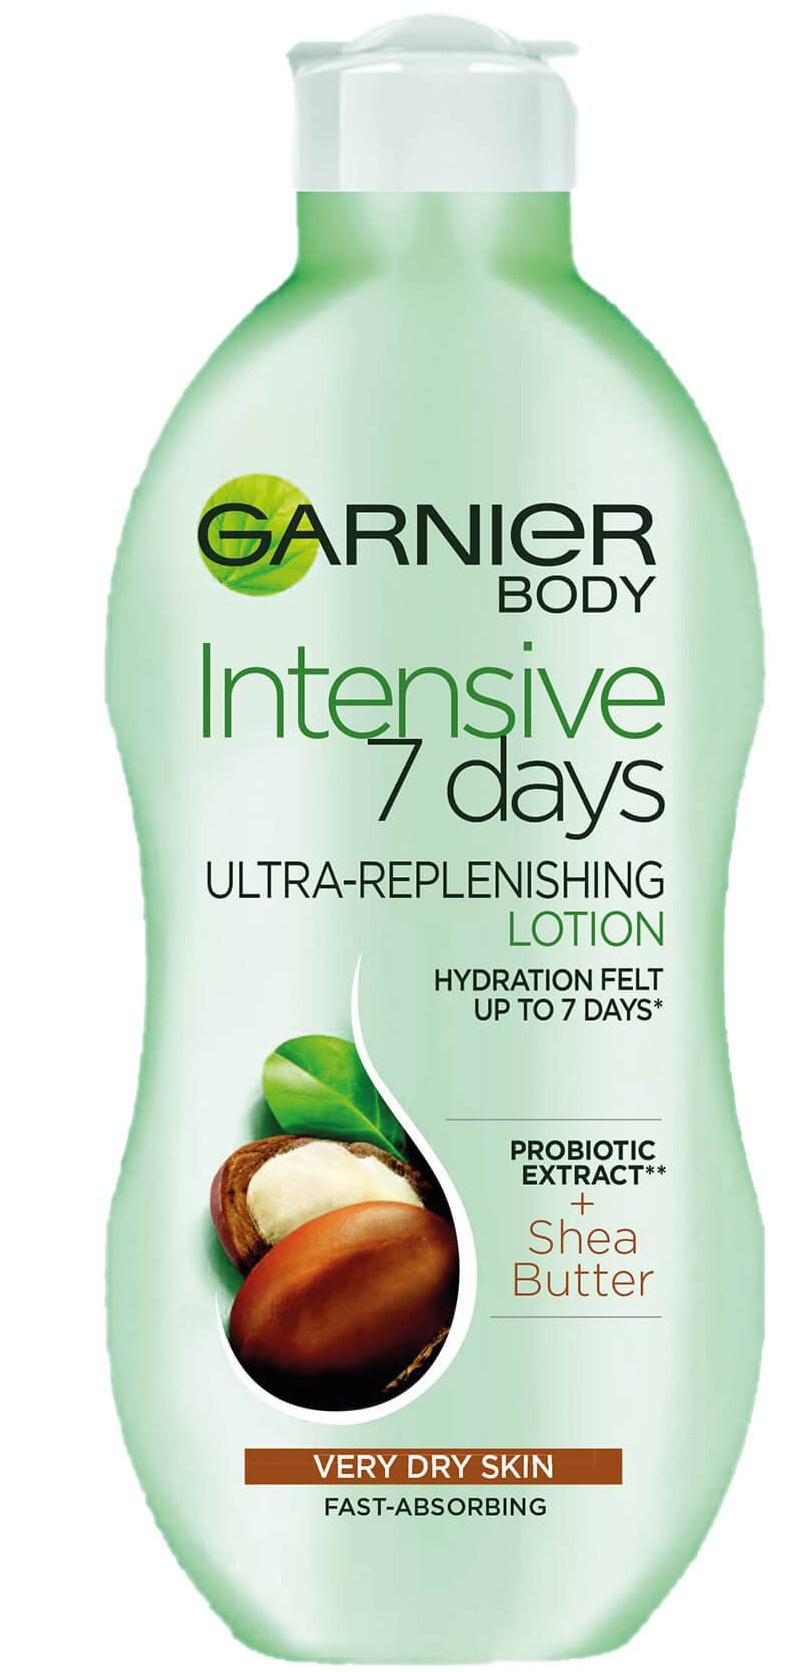 Garnier Intensive 7 Days Shea Butter Probiotic Extract Body Lotion